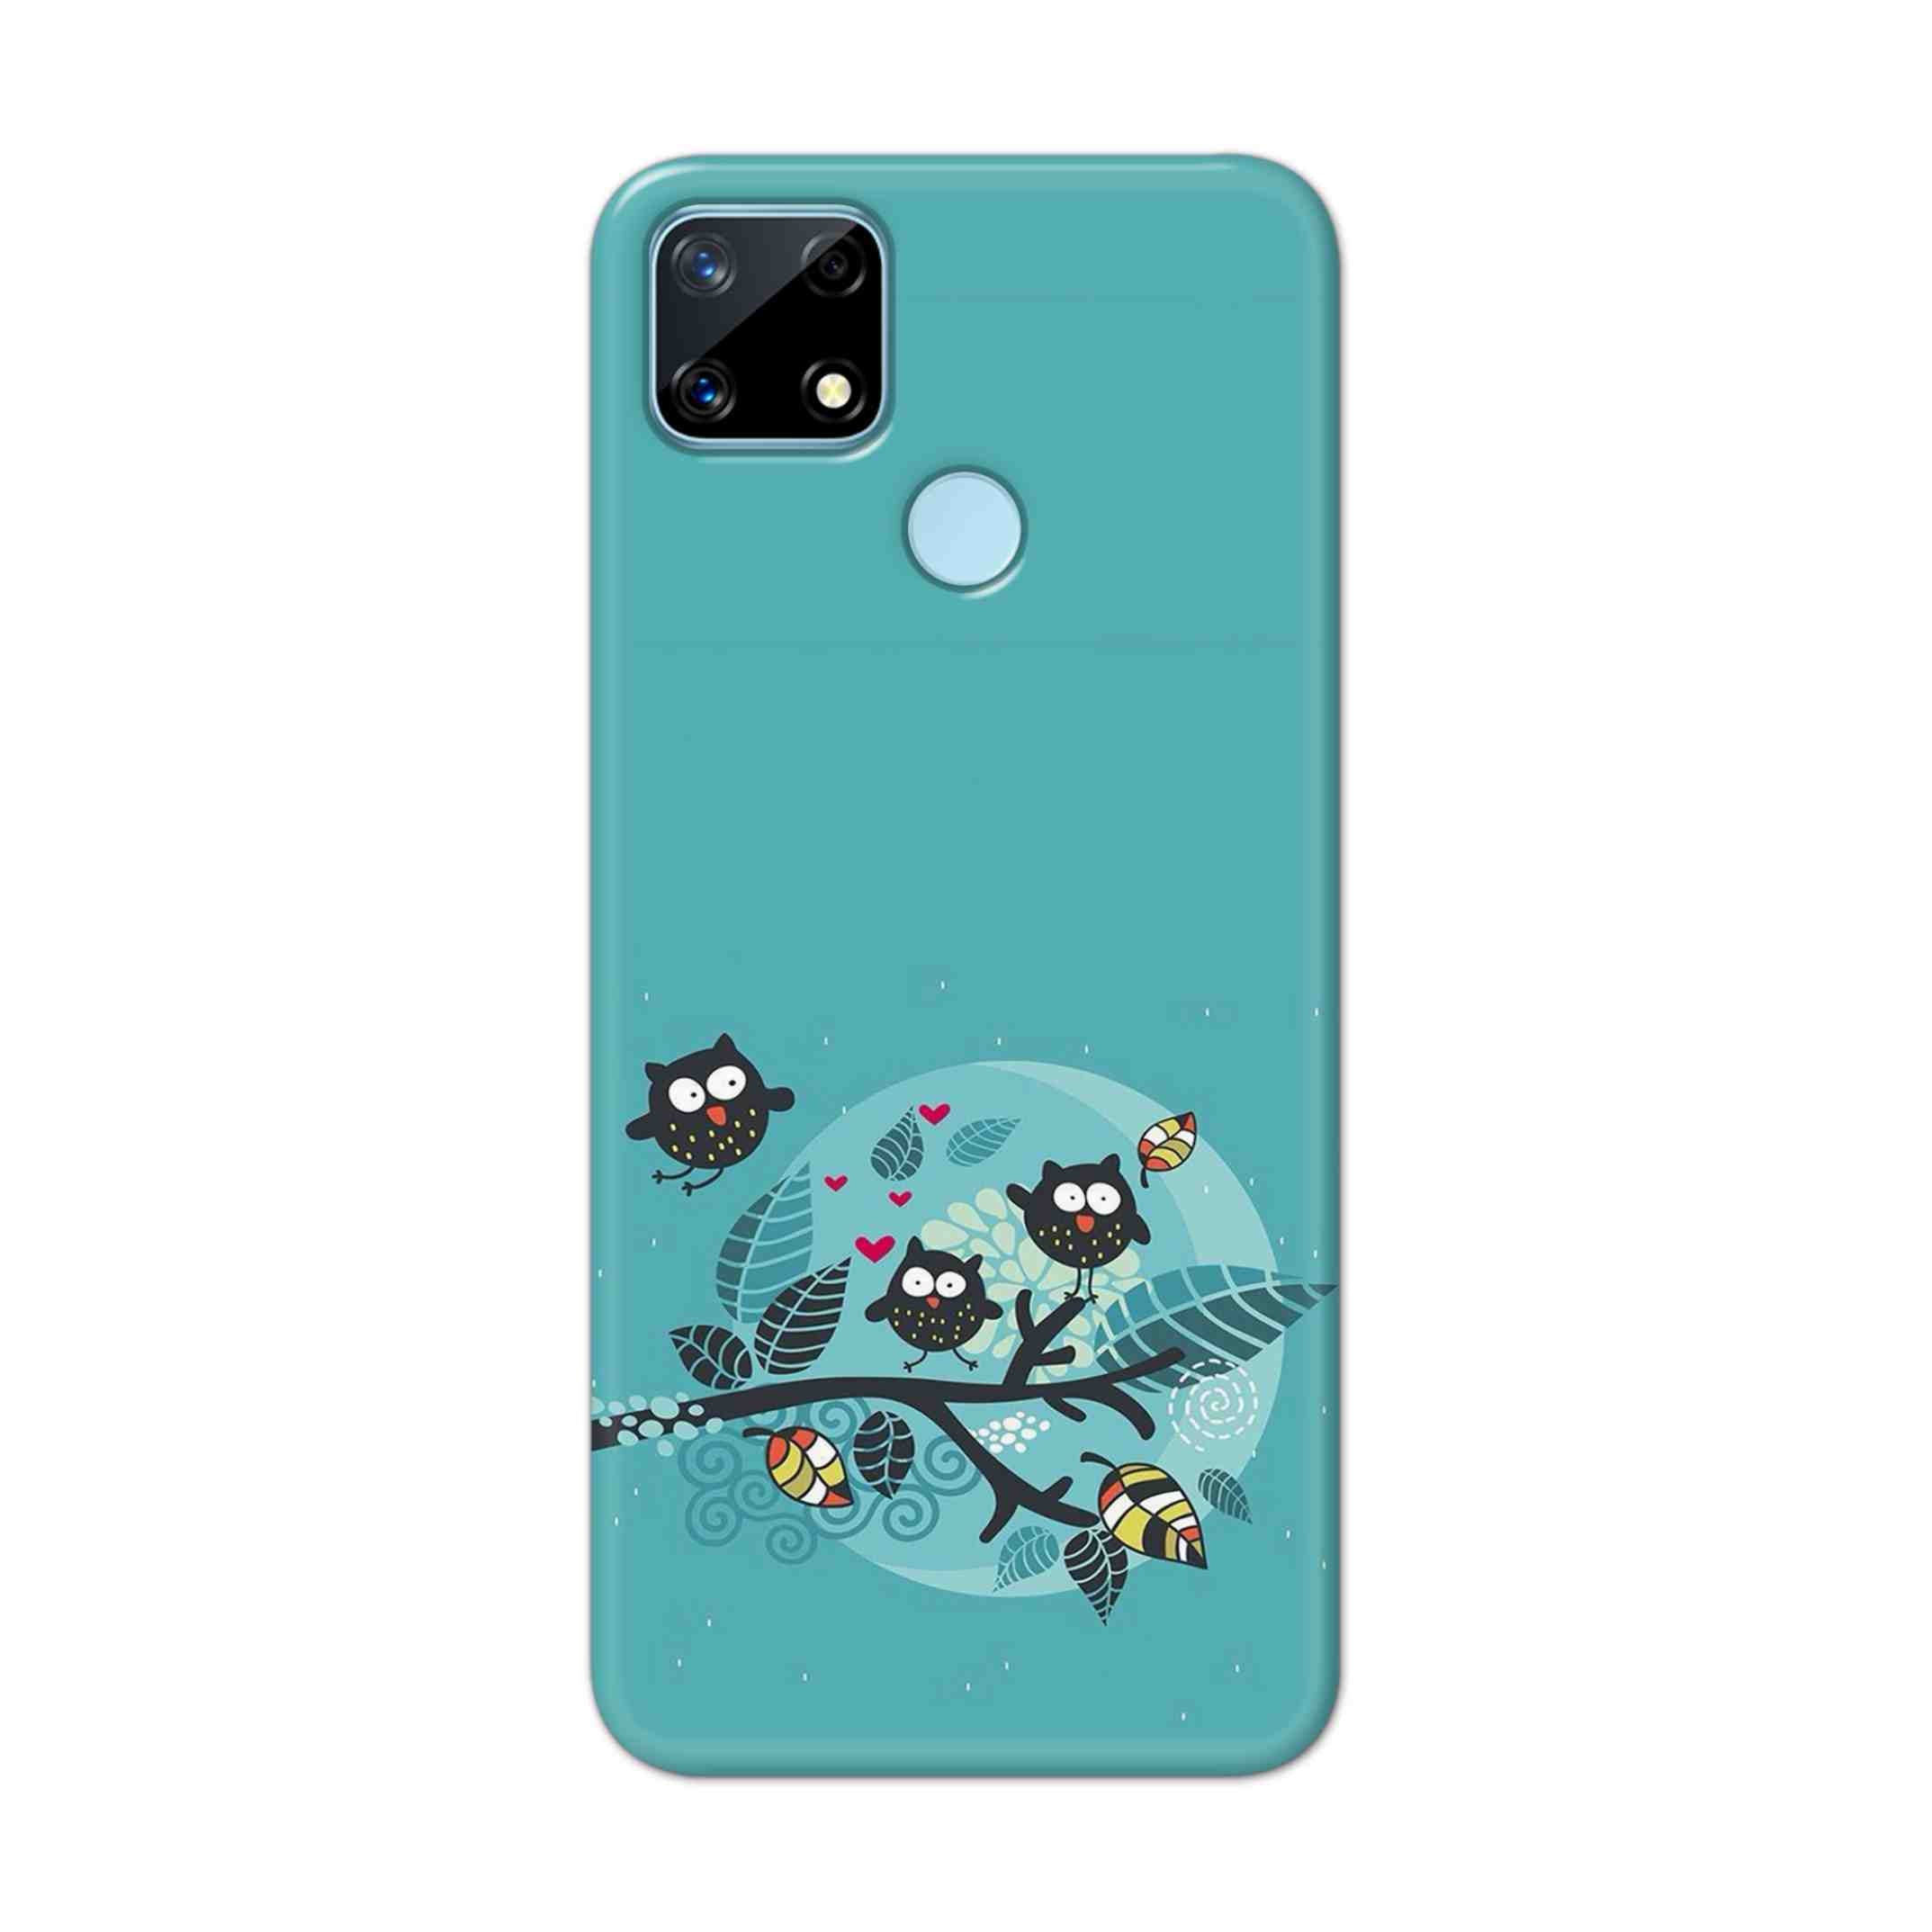 Buy Owl Hard Back Mobile Phone Case Cover For Realme Narzo 20 Online